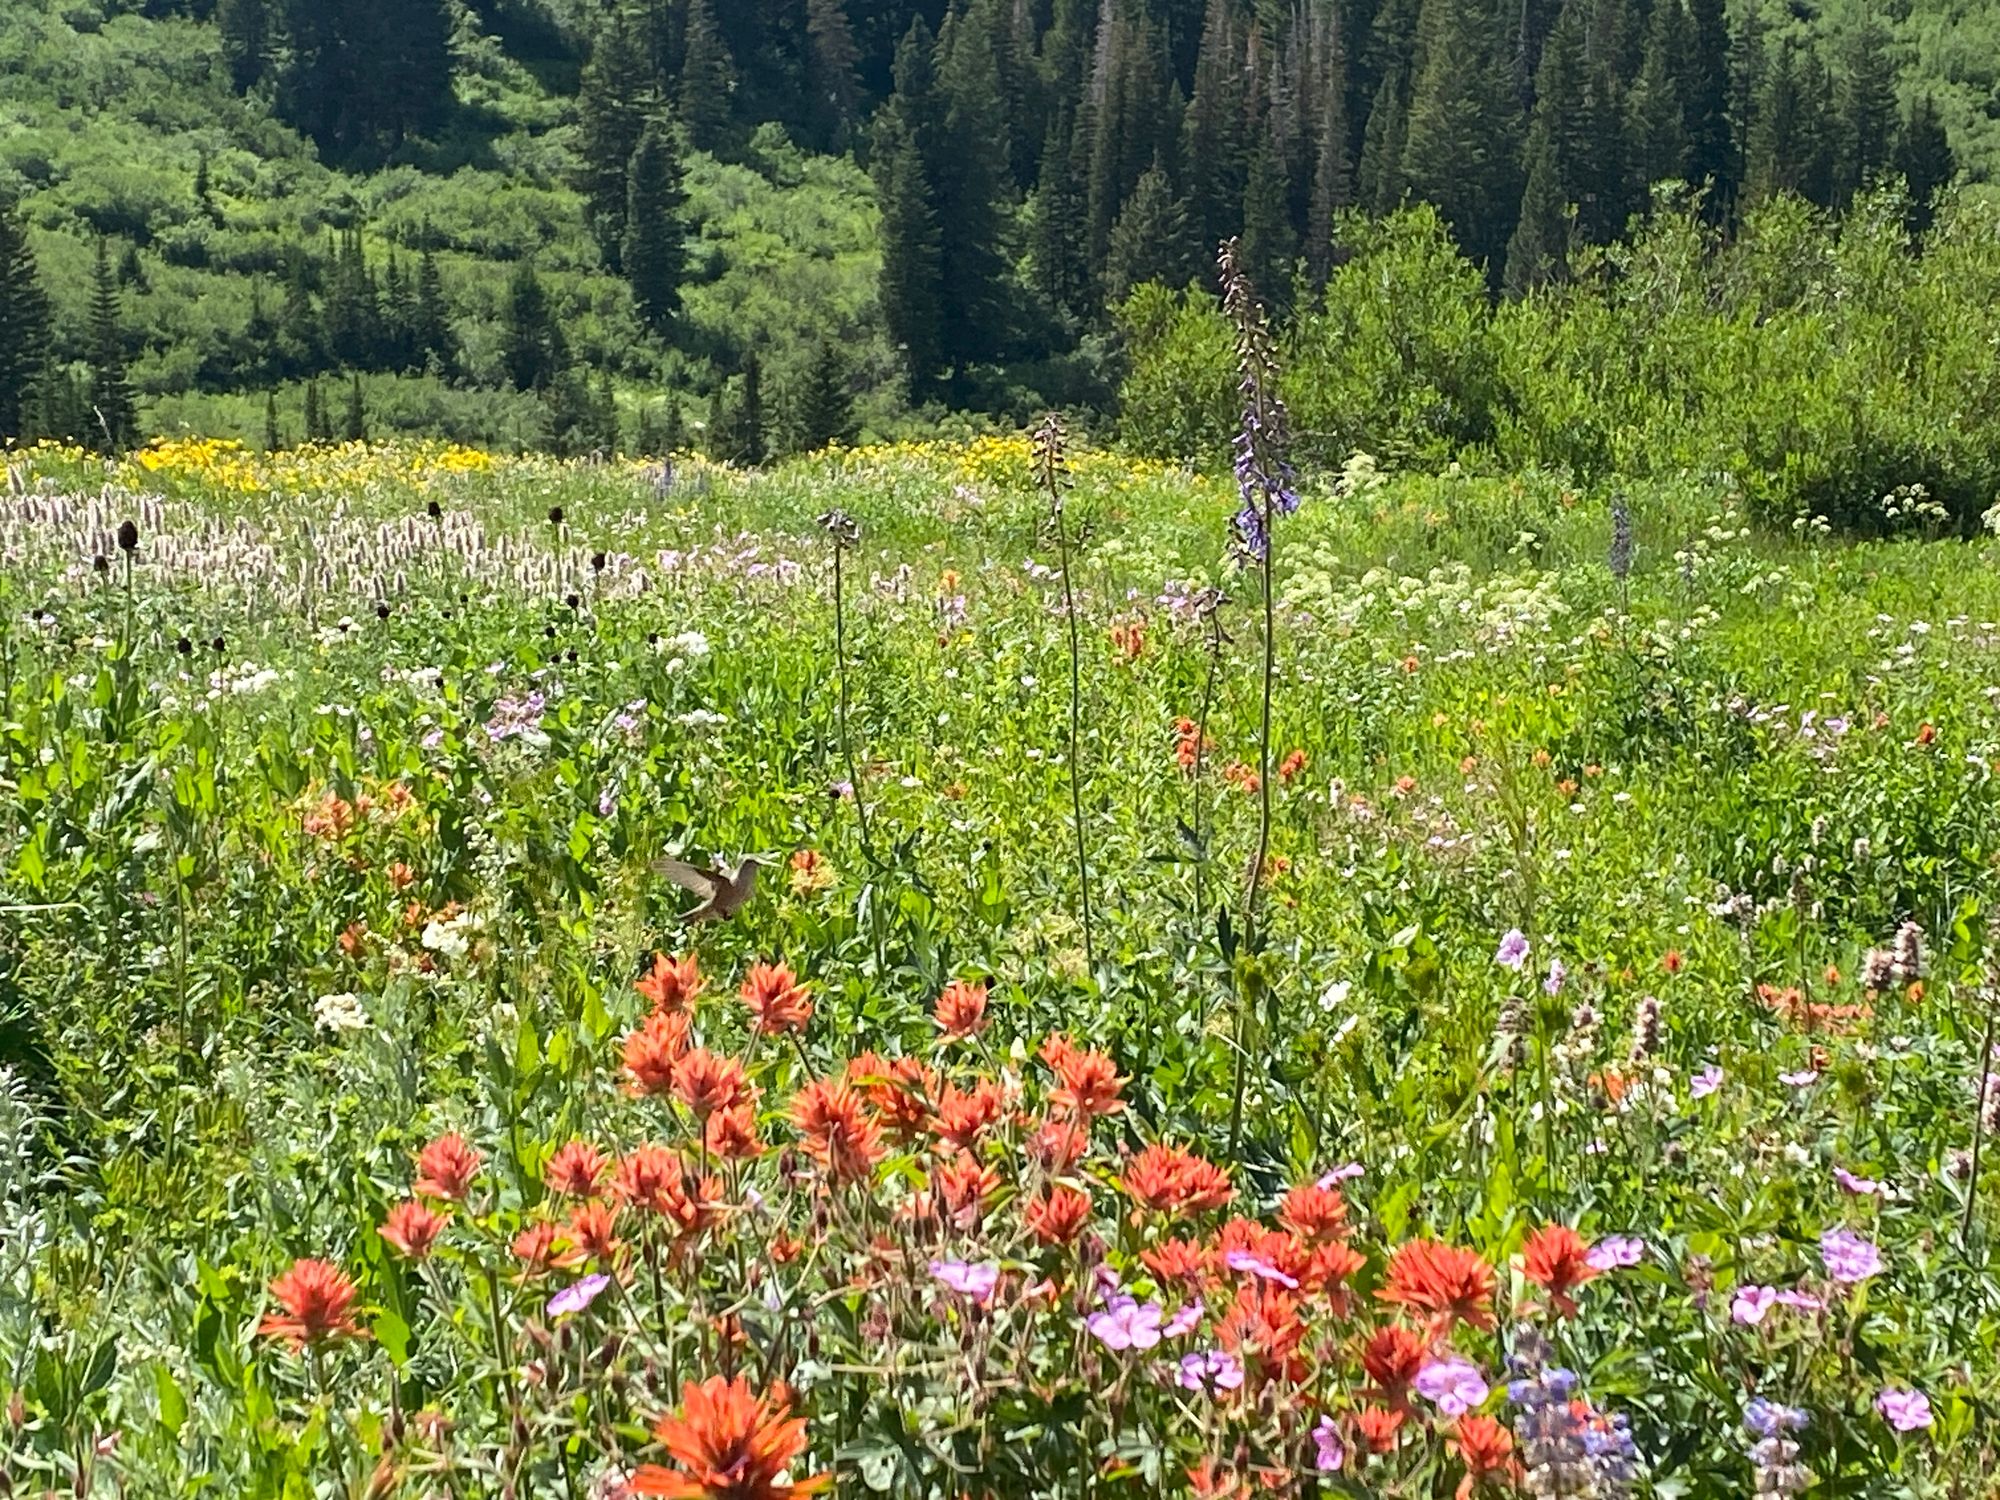 The wildflowers are popping in Salt Lake City's mountains!